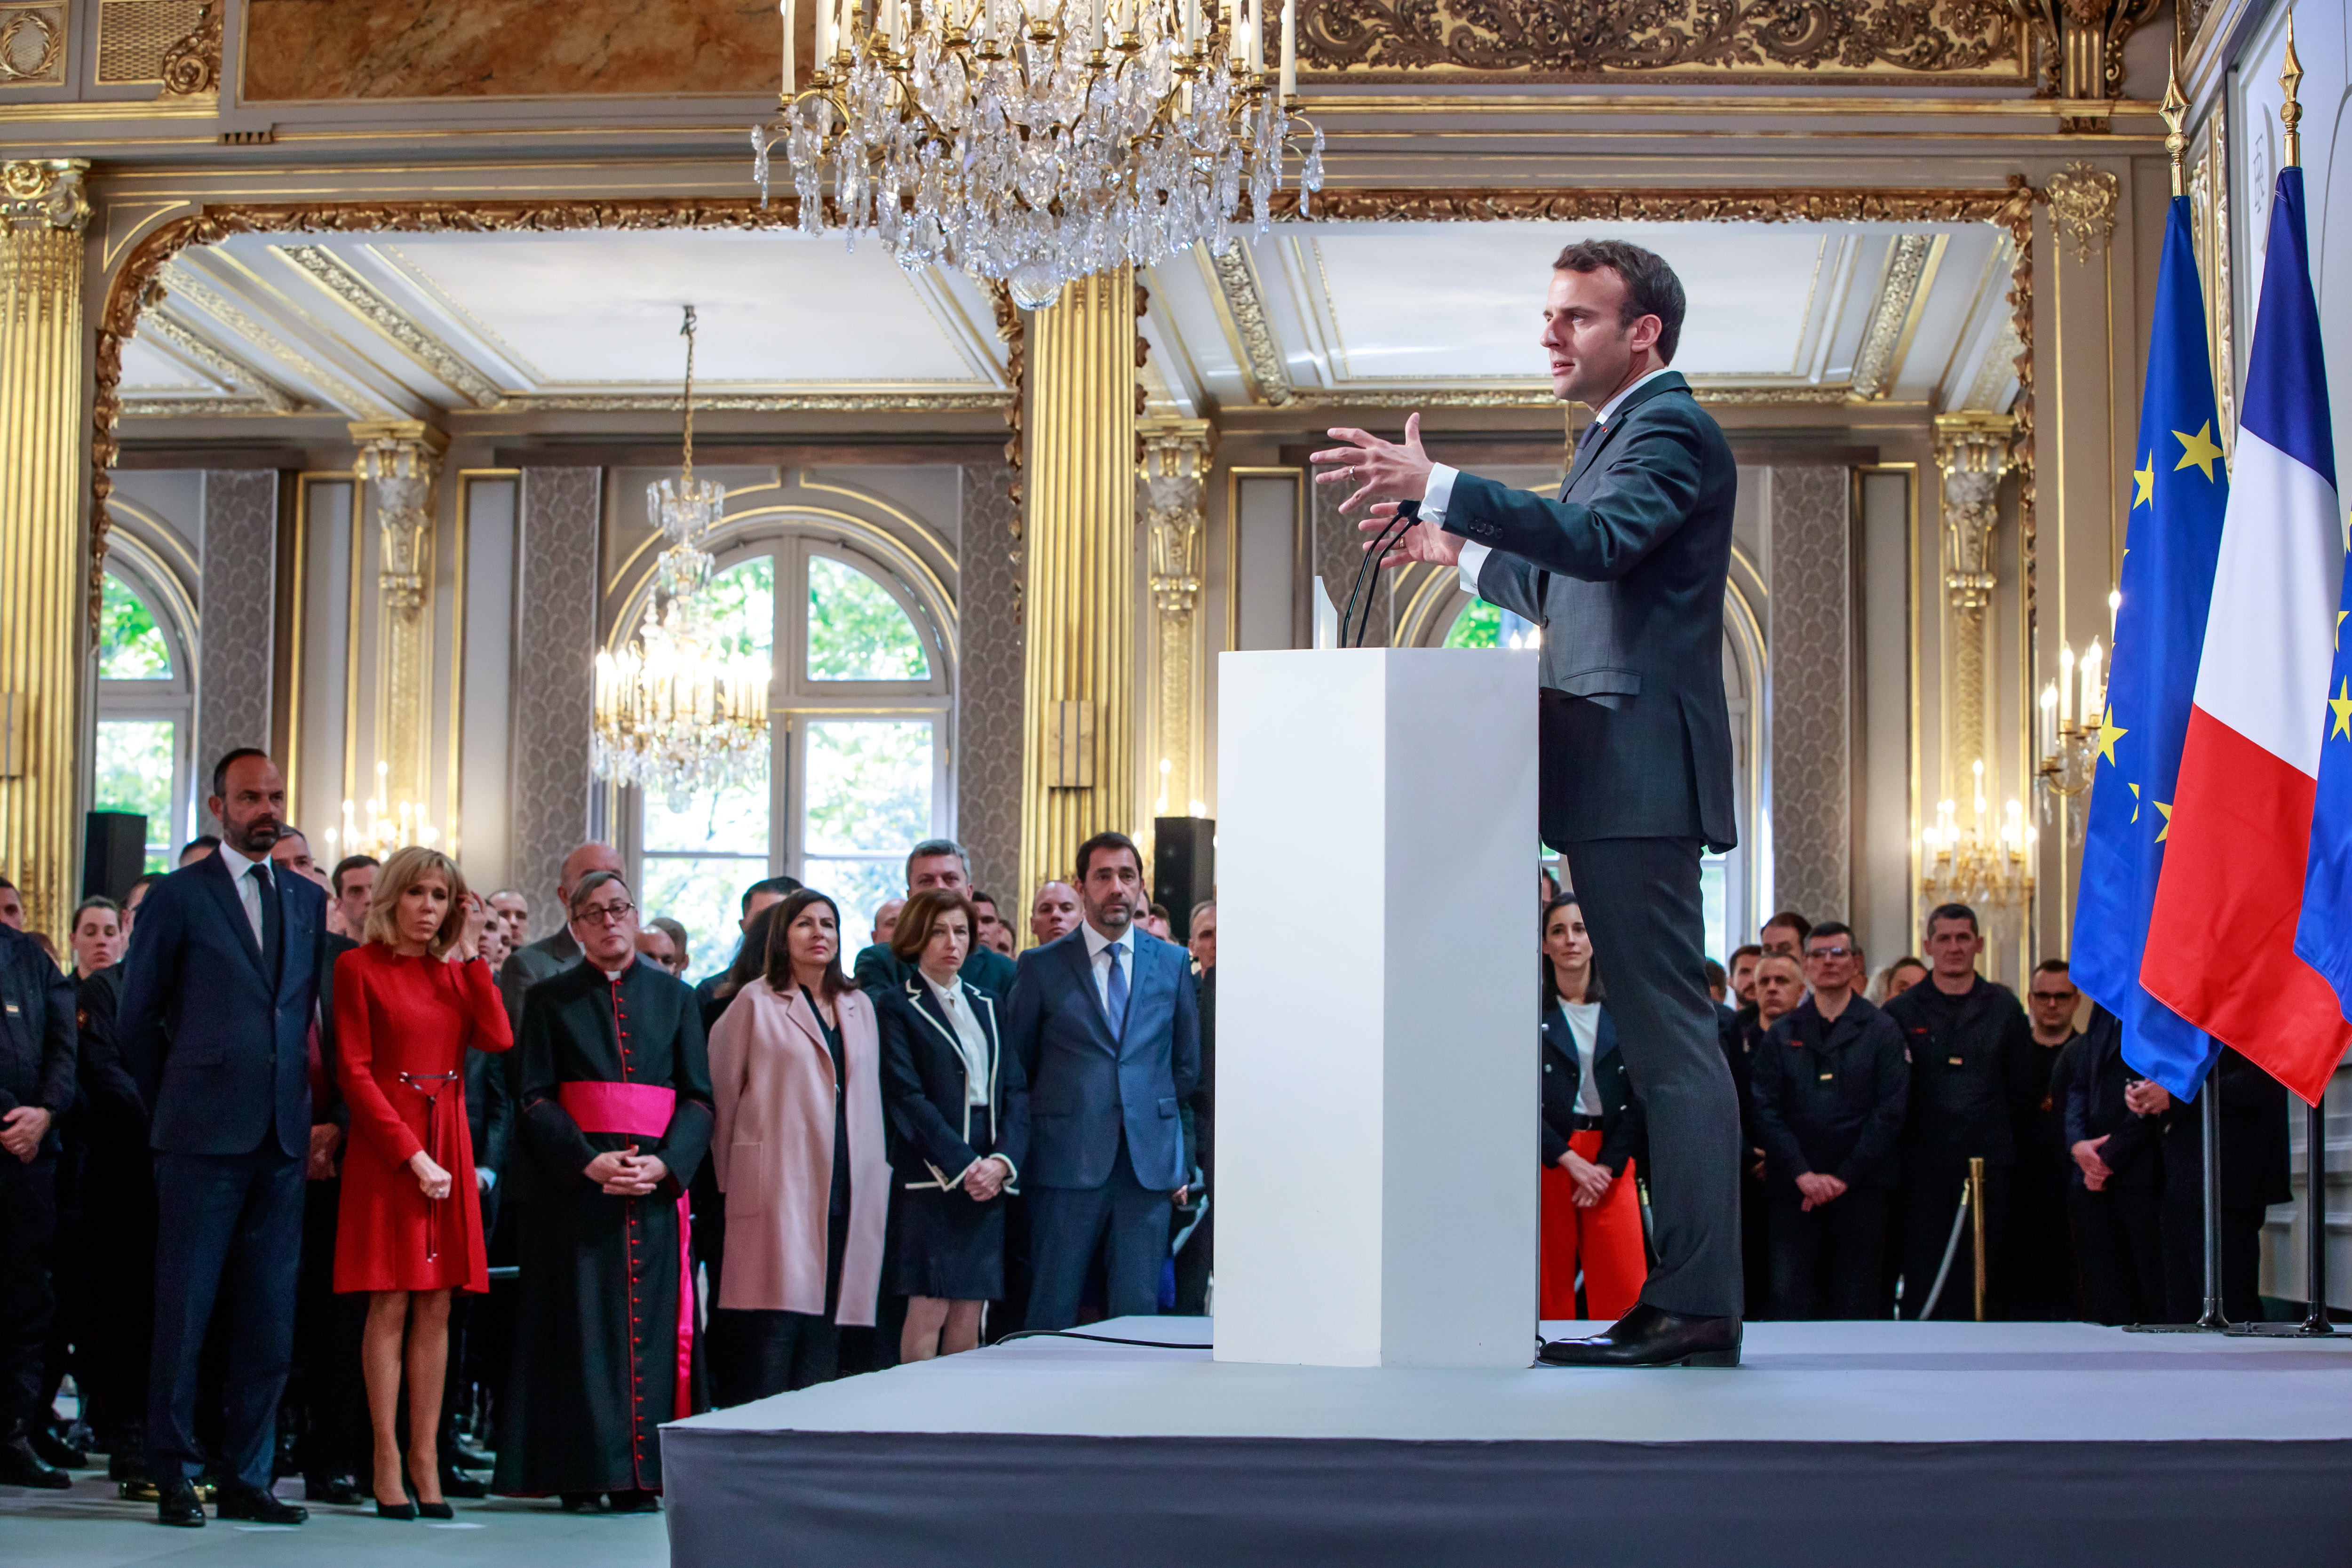 epa07513802 French President Emmanuel Macron (C) delivers a speech for the Parisian Firefighters' brigade and security forces who took part at the fire extinguishing operations during the Notre Dame of Paris Cathedral fire, at Elysee Palace in Paris, France, 18 April 2019. A fire of which cause is still not established, ravaged Notre Dame of Paris Cathedral, one of the most visited monuments of the French capital, on 15 April.  EPA/CHRISTOPHE PETIT TESSON / POOL